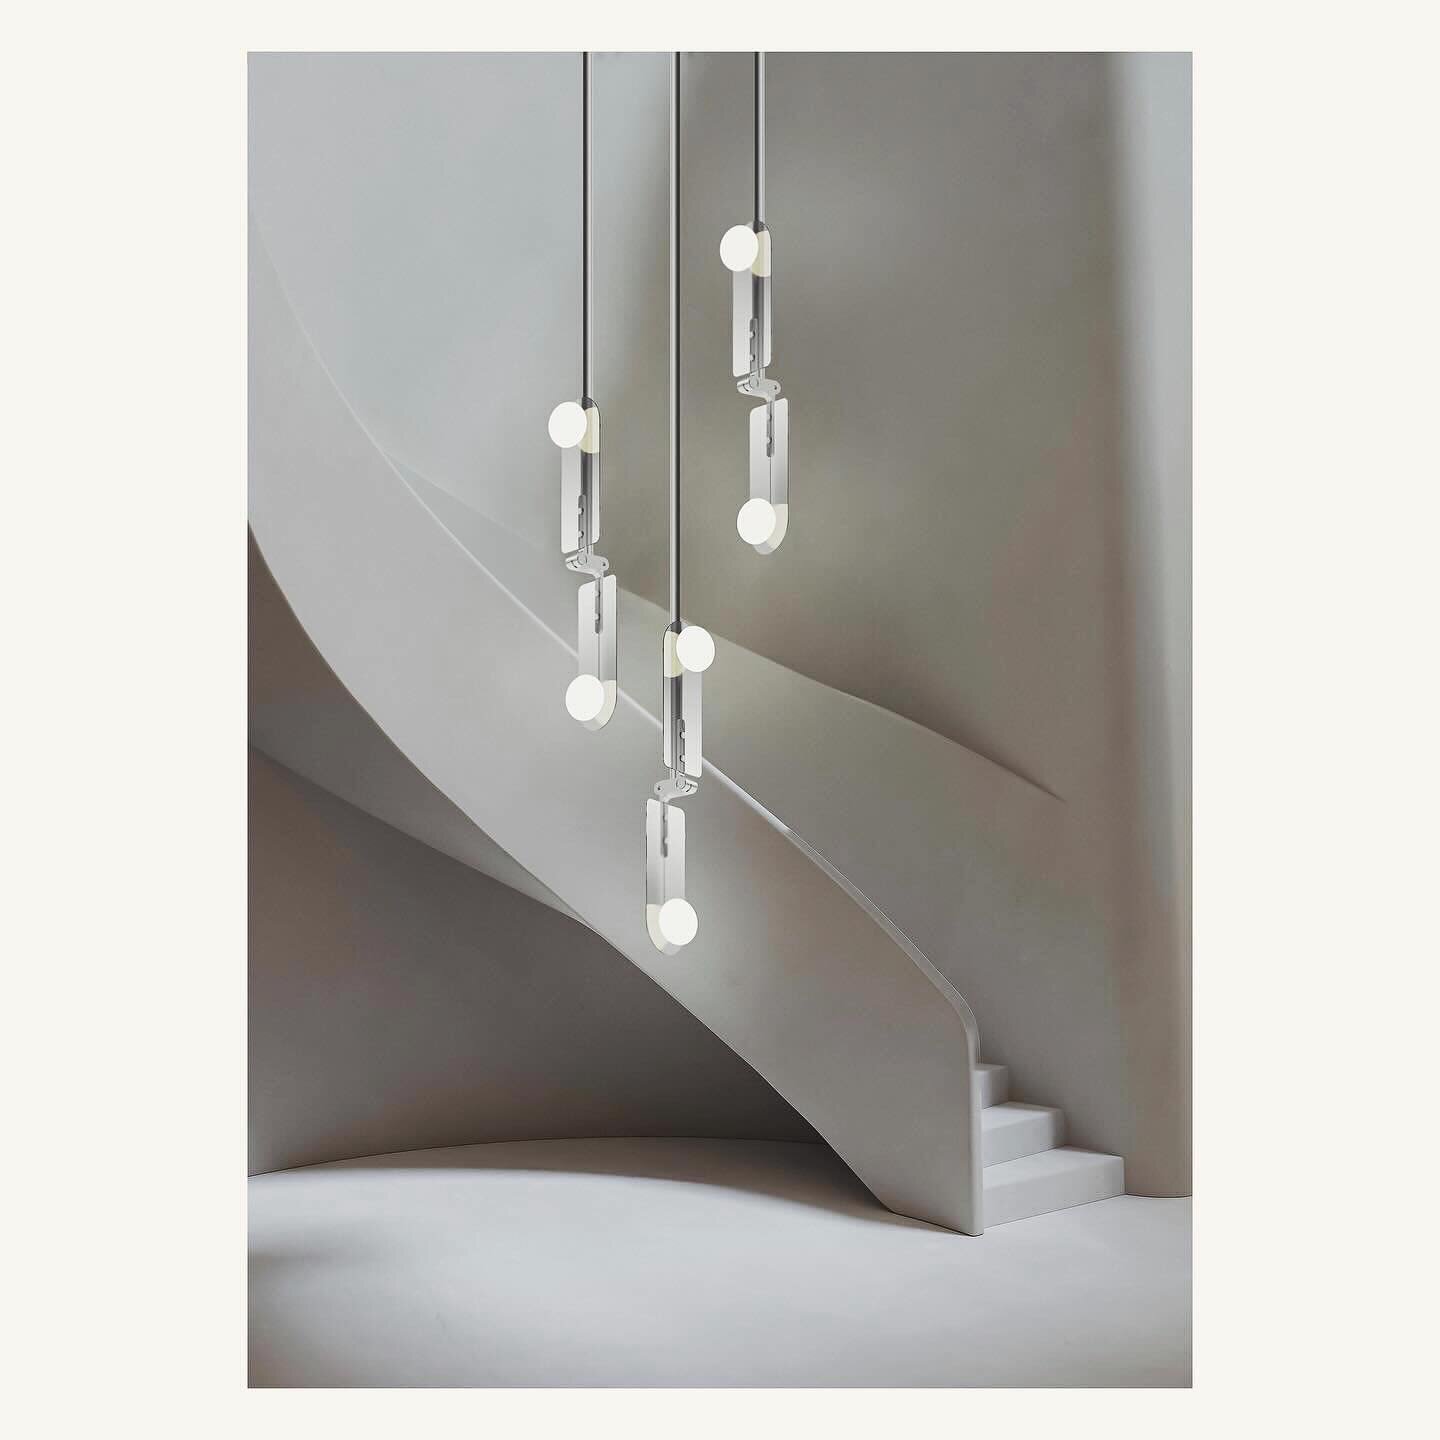 Kinetic sculpture or fixed ambient elegance? ✨

&bull; CHRYSALIS Ceiling Light 0-180 Degree Set Angle Configuration in Cloud Grey Glass and Brushed Aluminium Metal Finish &bull;

Soon to be available to shop in fixed/ set angle configurations through